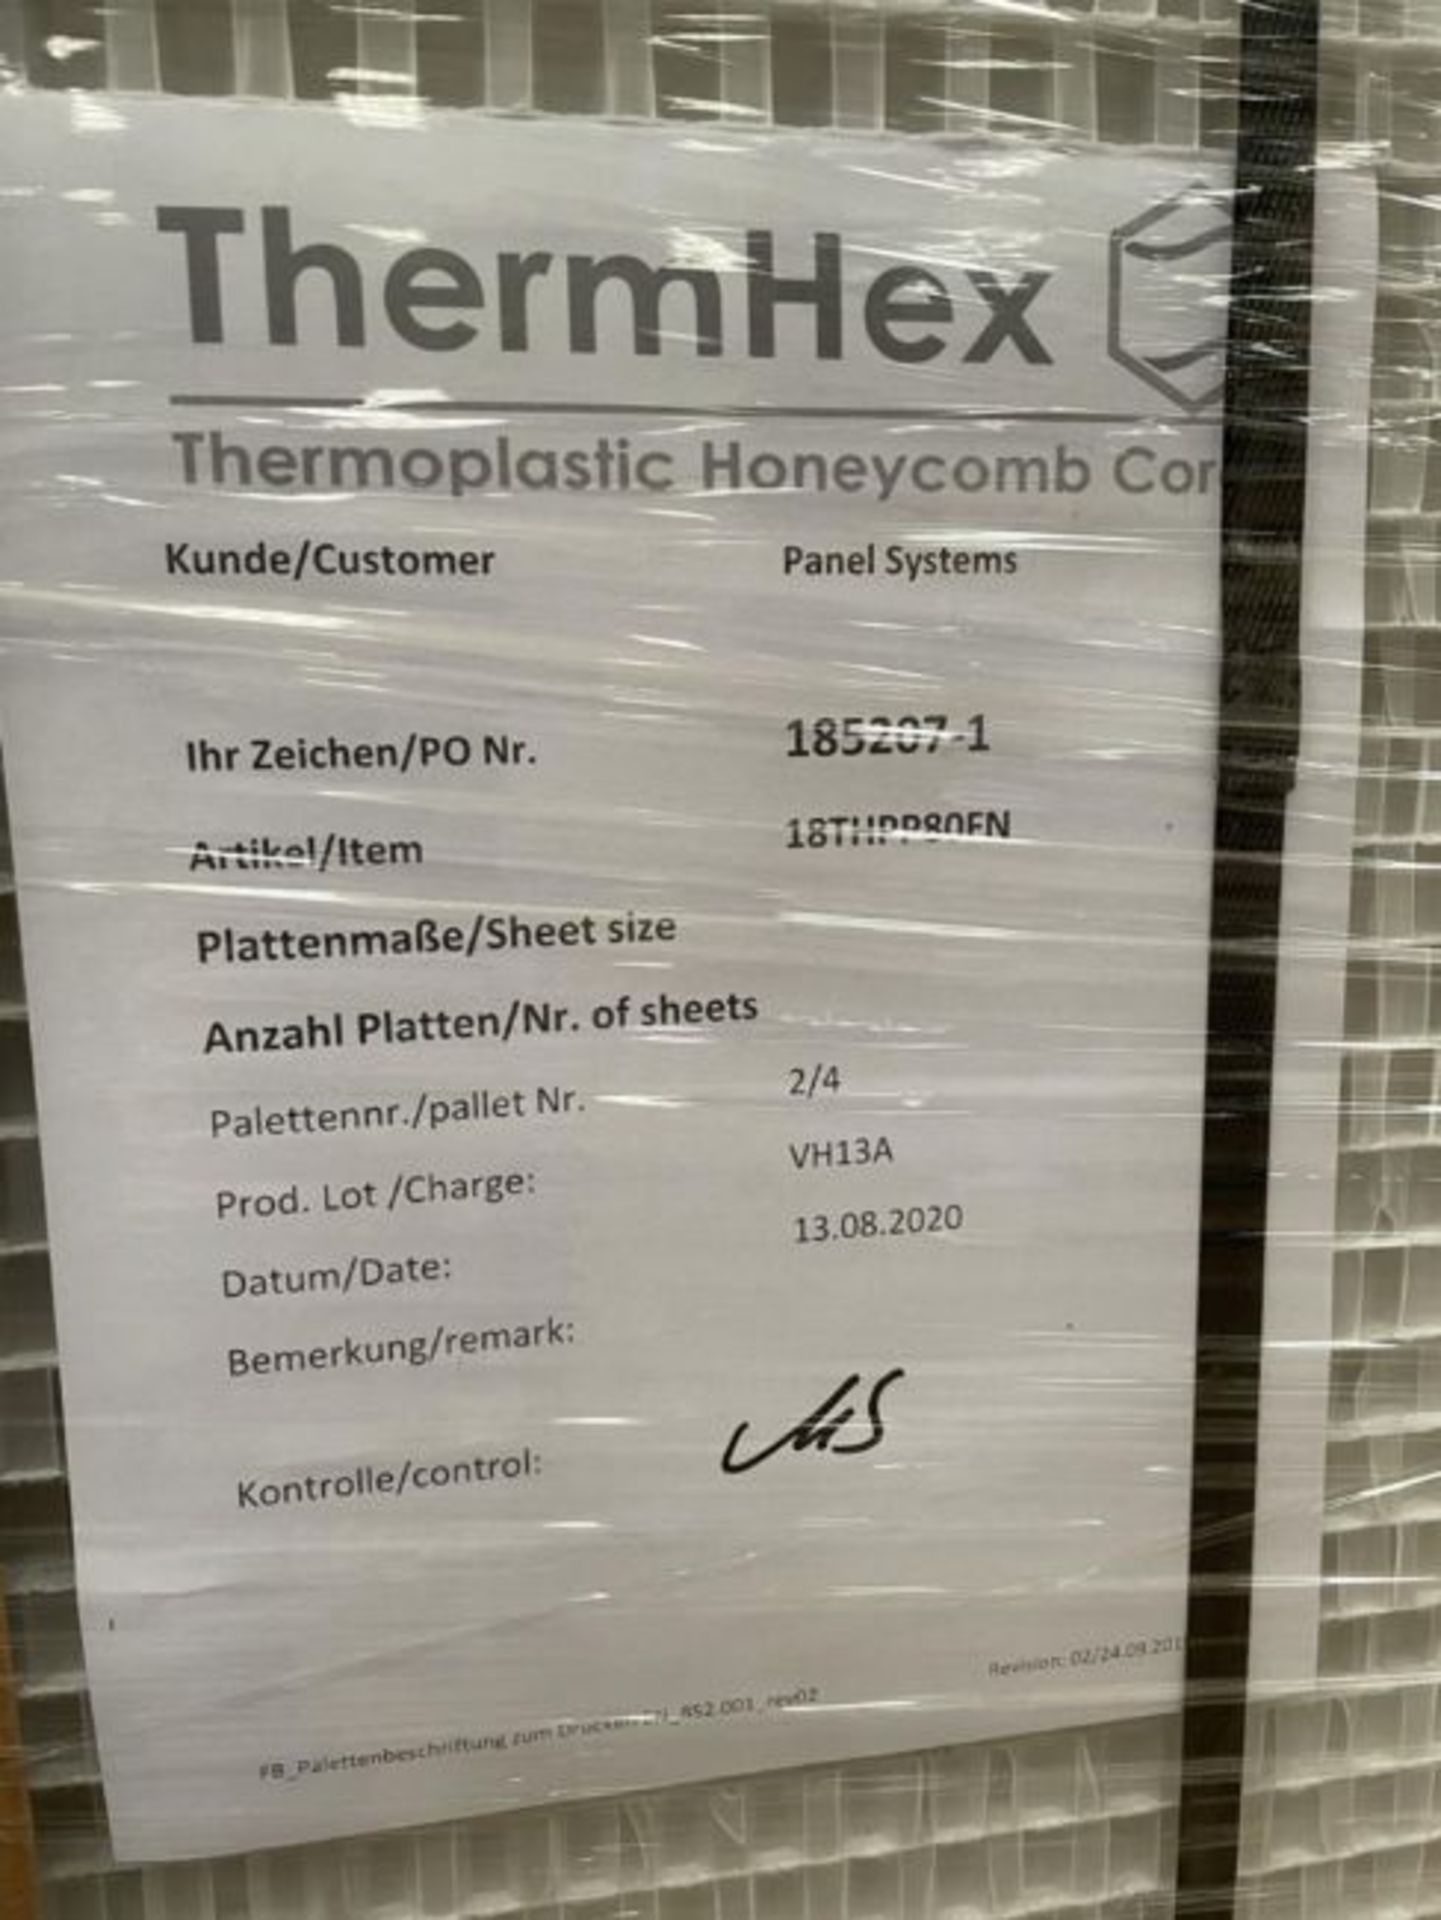 100 x ThermHex Thermoplastic Honeycomb Core Panels - Size: 693 x 1210 x 20mm - New Stock - - Image 4 of 7